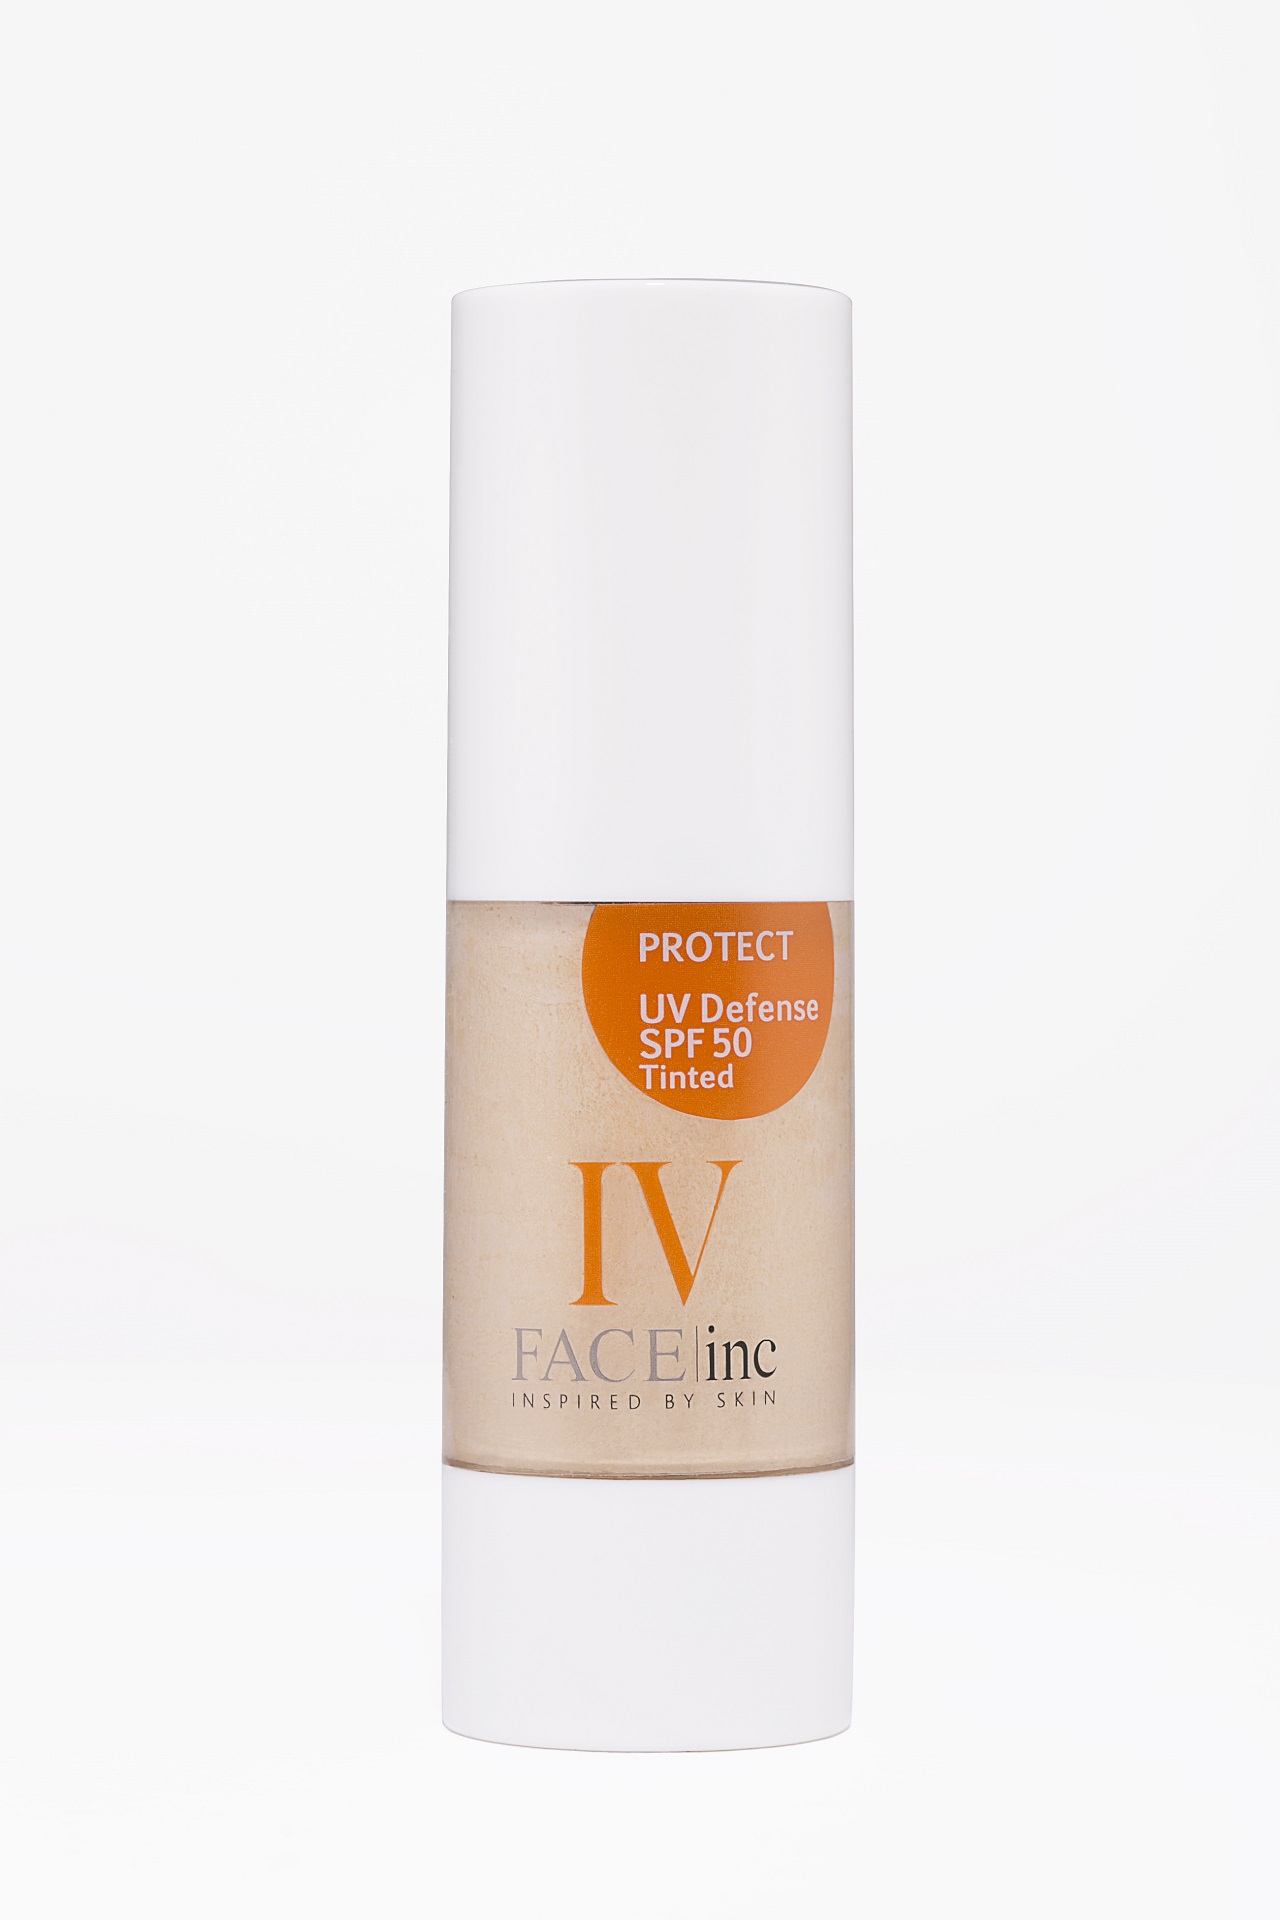 The Face Inc UV Defense SPF50 Tinted-Pamper.my